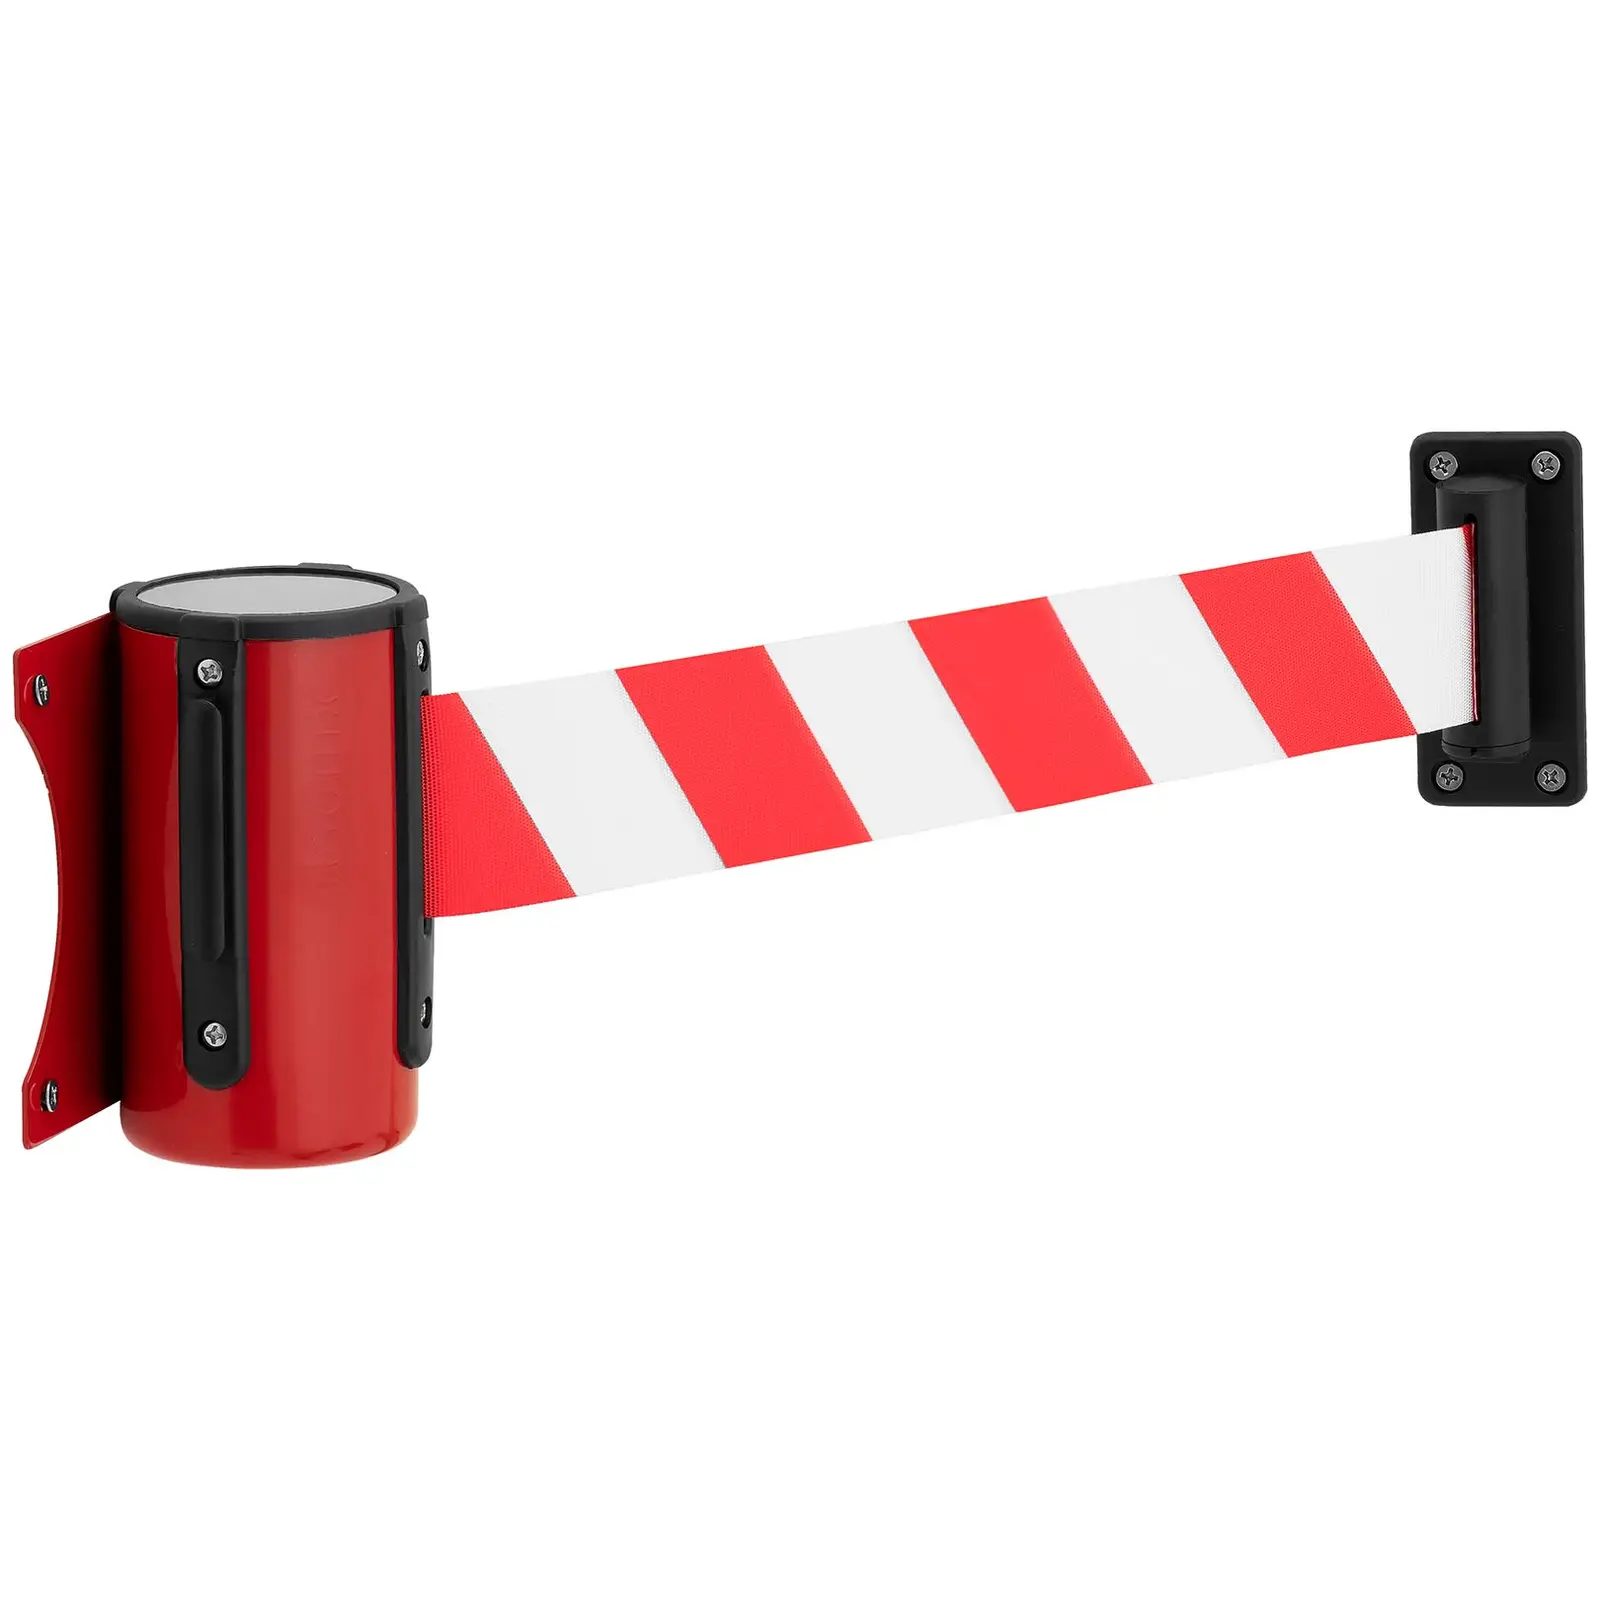 Wall Mounted Retractable Barrier - red/white - 2 m